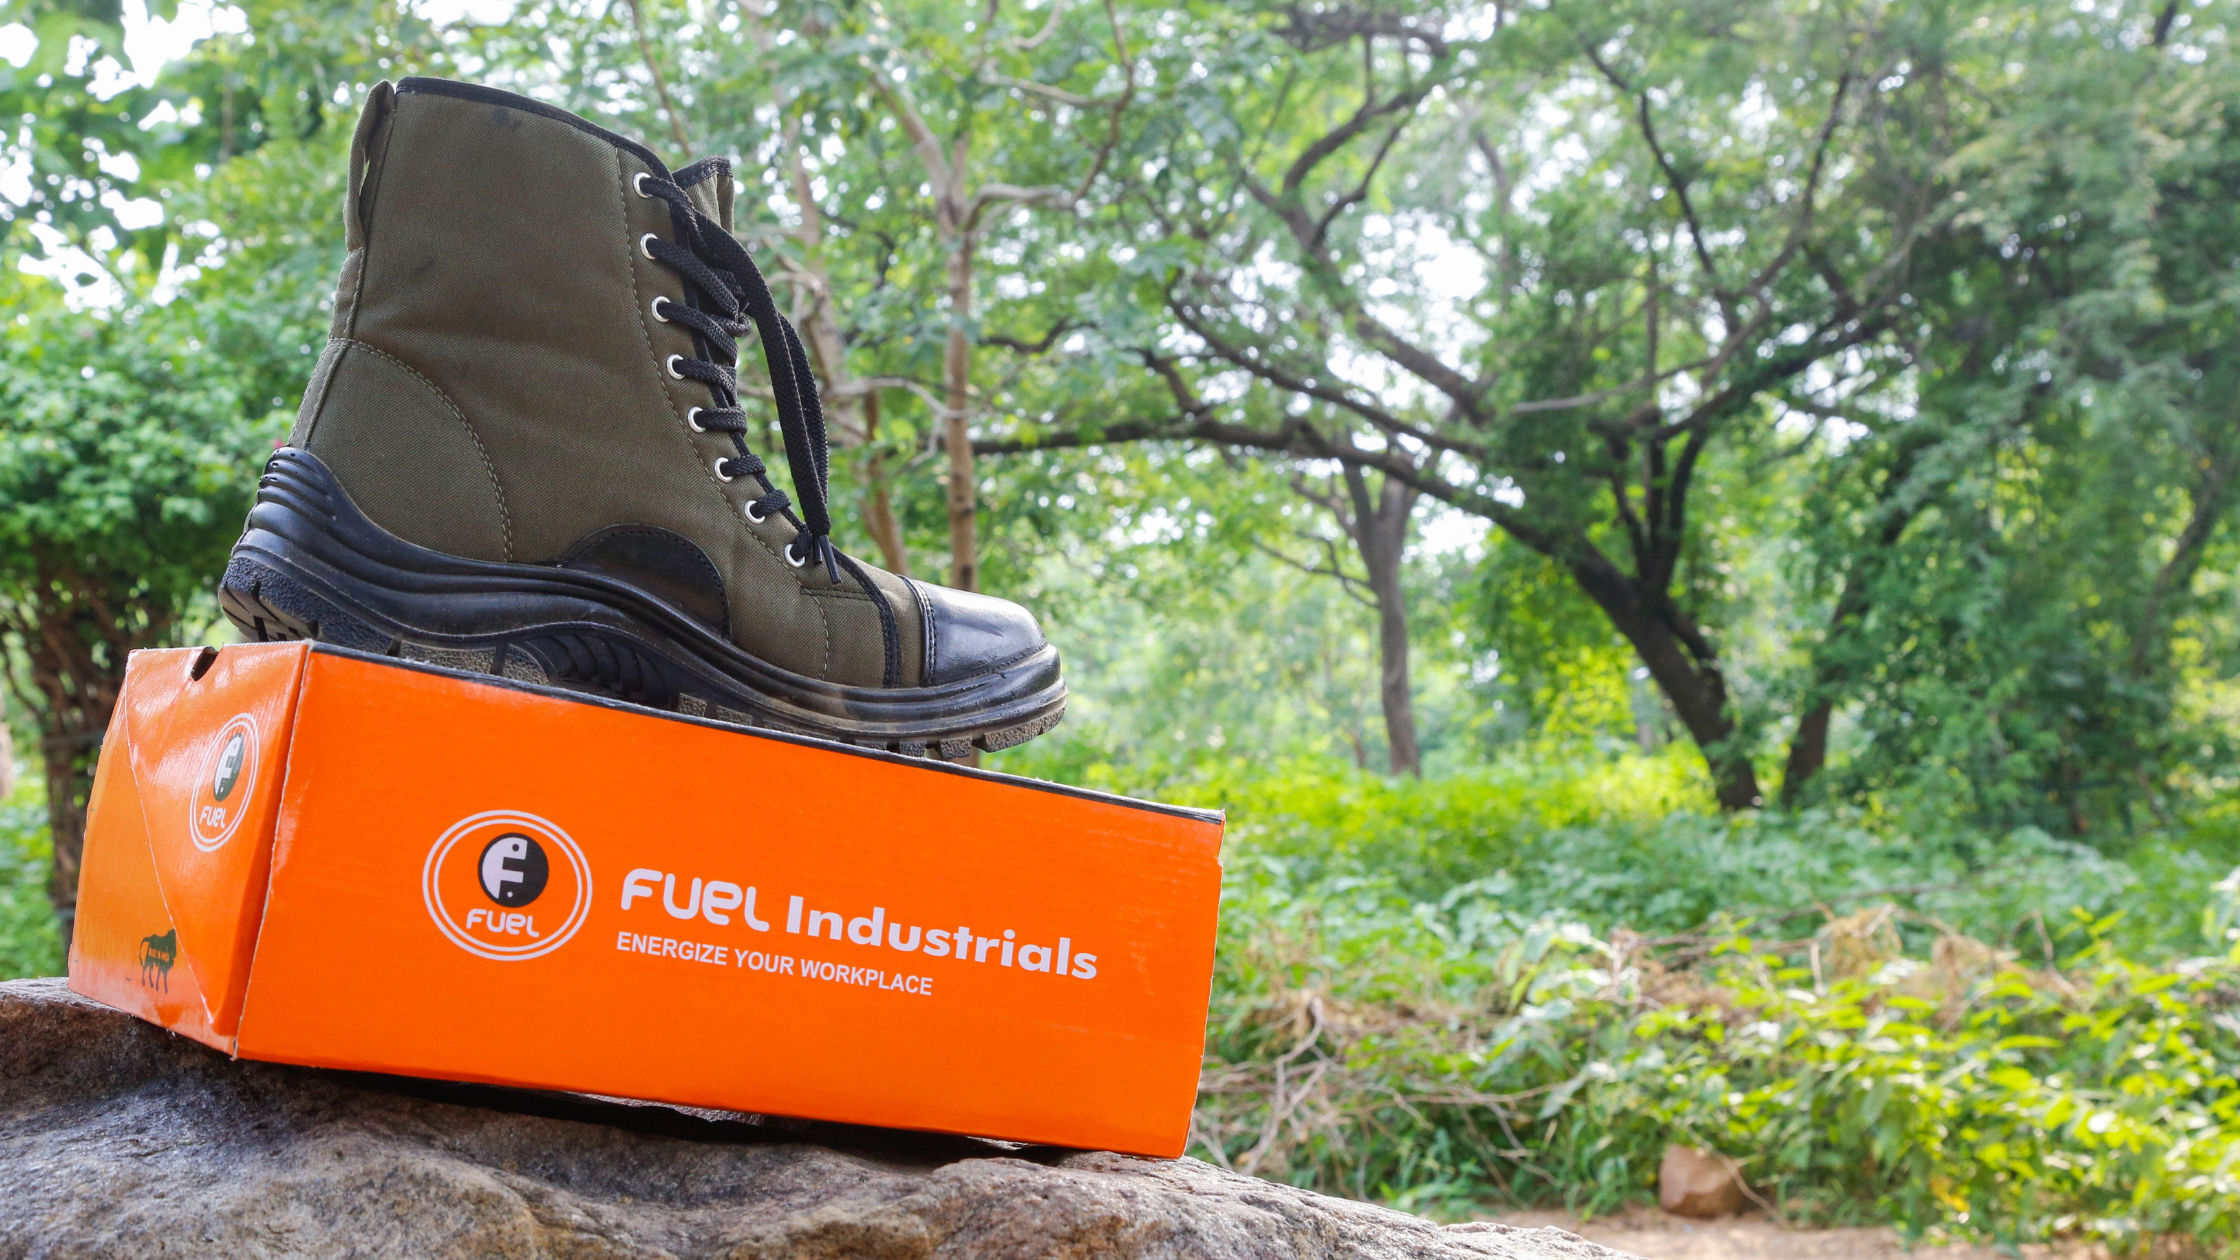 What are the lightest safety shoes?